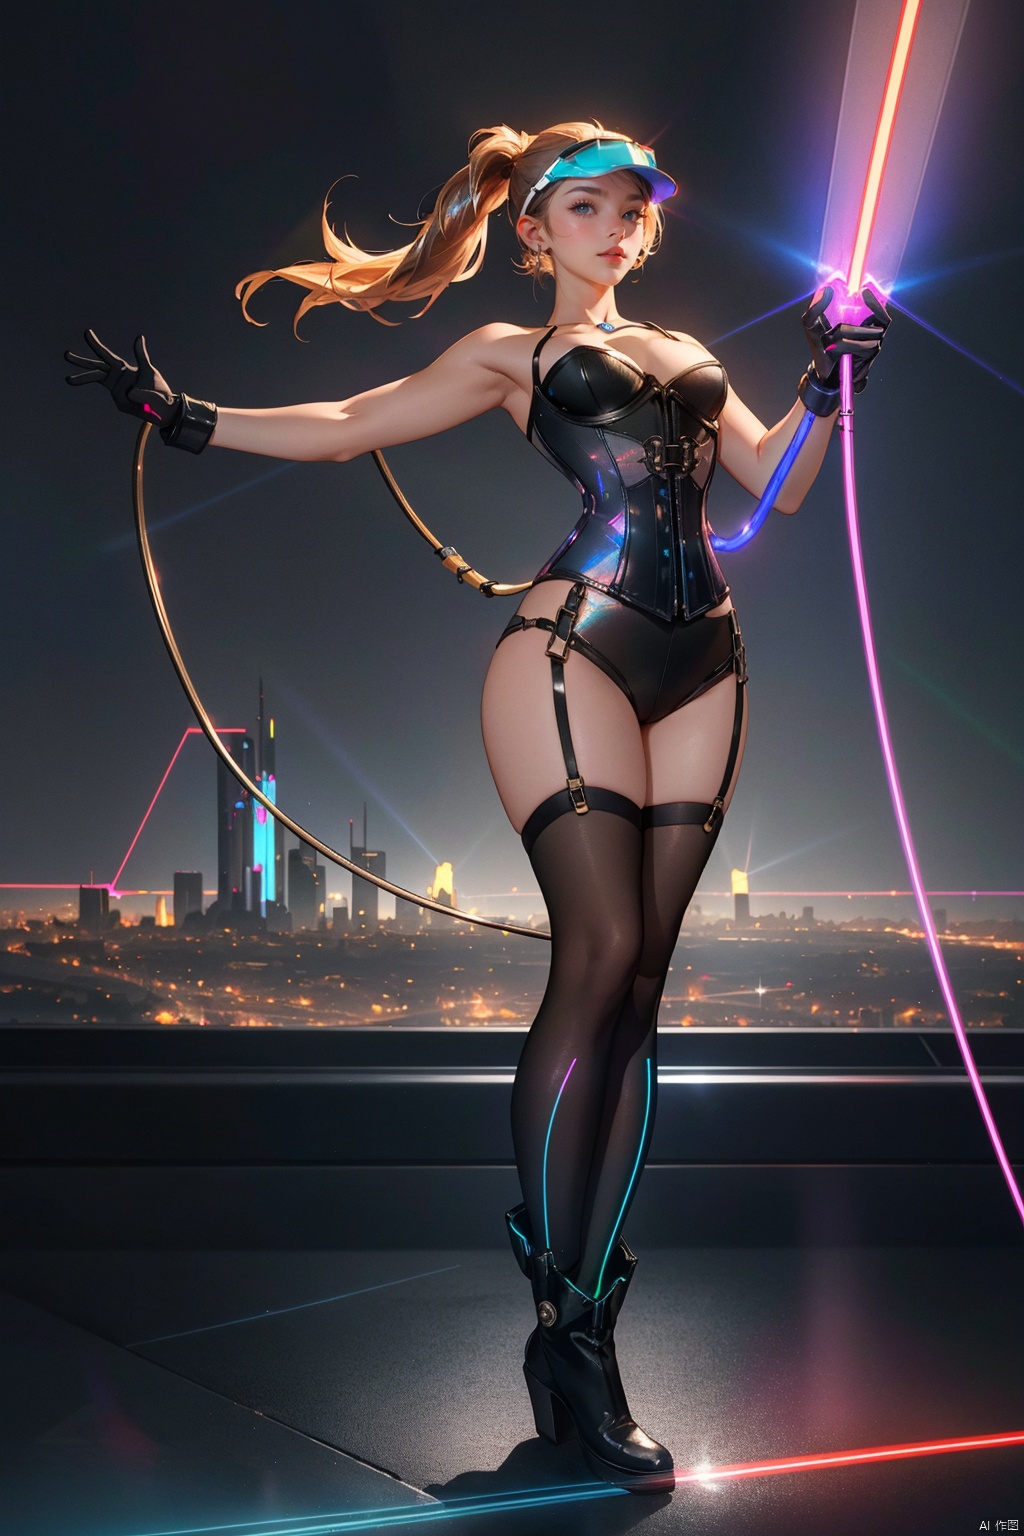 1girl, (mecha-maid), cyberpunk, (bustier with mechanical accents:1.6), (exposed circuitry details:1.3), futuristic thigh-high boots, (holographic visor:1.5), (artificial skin:0.9), (metallic accents:1.4), (dynamic pose:1.7), (plume of steam:1.2), (backdrop: neon cityscape:1.5), (tactical gloves:1.1), (synthetic hair in ponytail:1.3), (laser whip:1.8), (subtle glow effects:1.4), (shattered glass floor:0.8), floating holographic interface, (implant ports:1.1), confident stance, elongated limbs, smoke effects., ((poakl)), , (wide shot:0.95), (Dynamic pose:1.4),